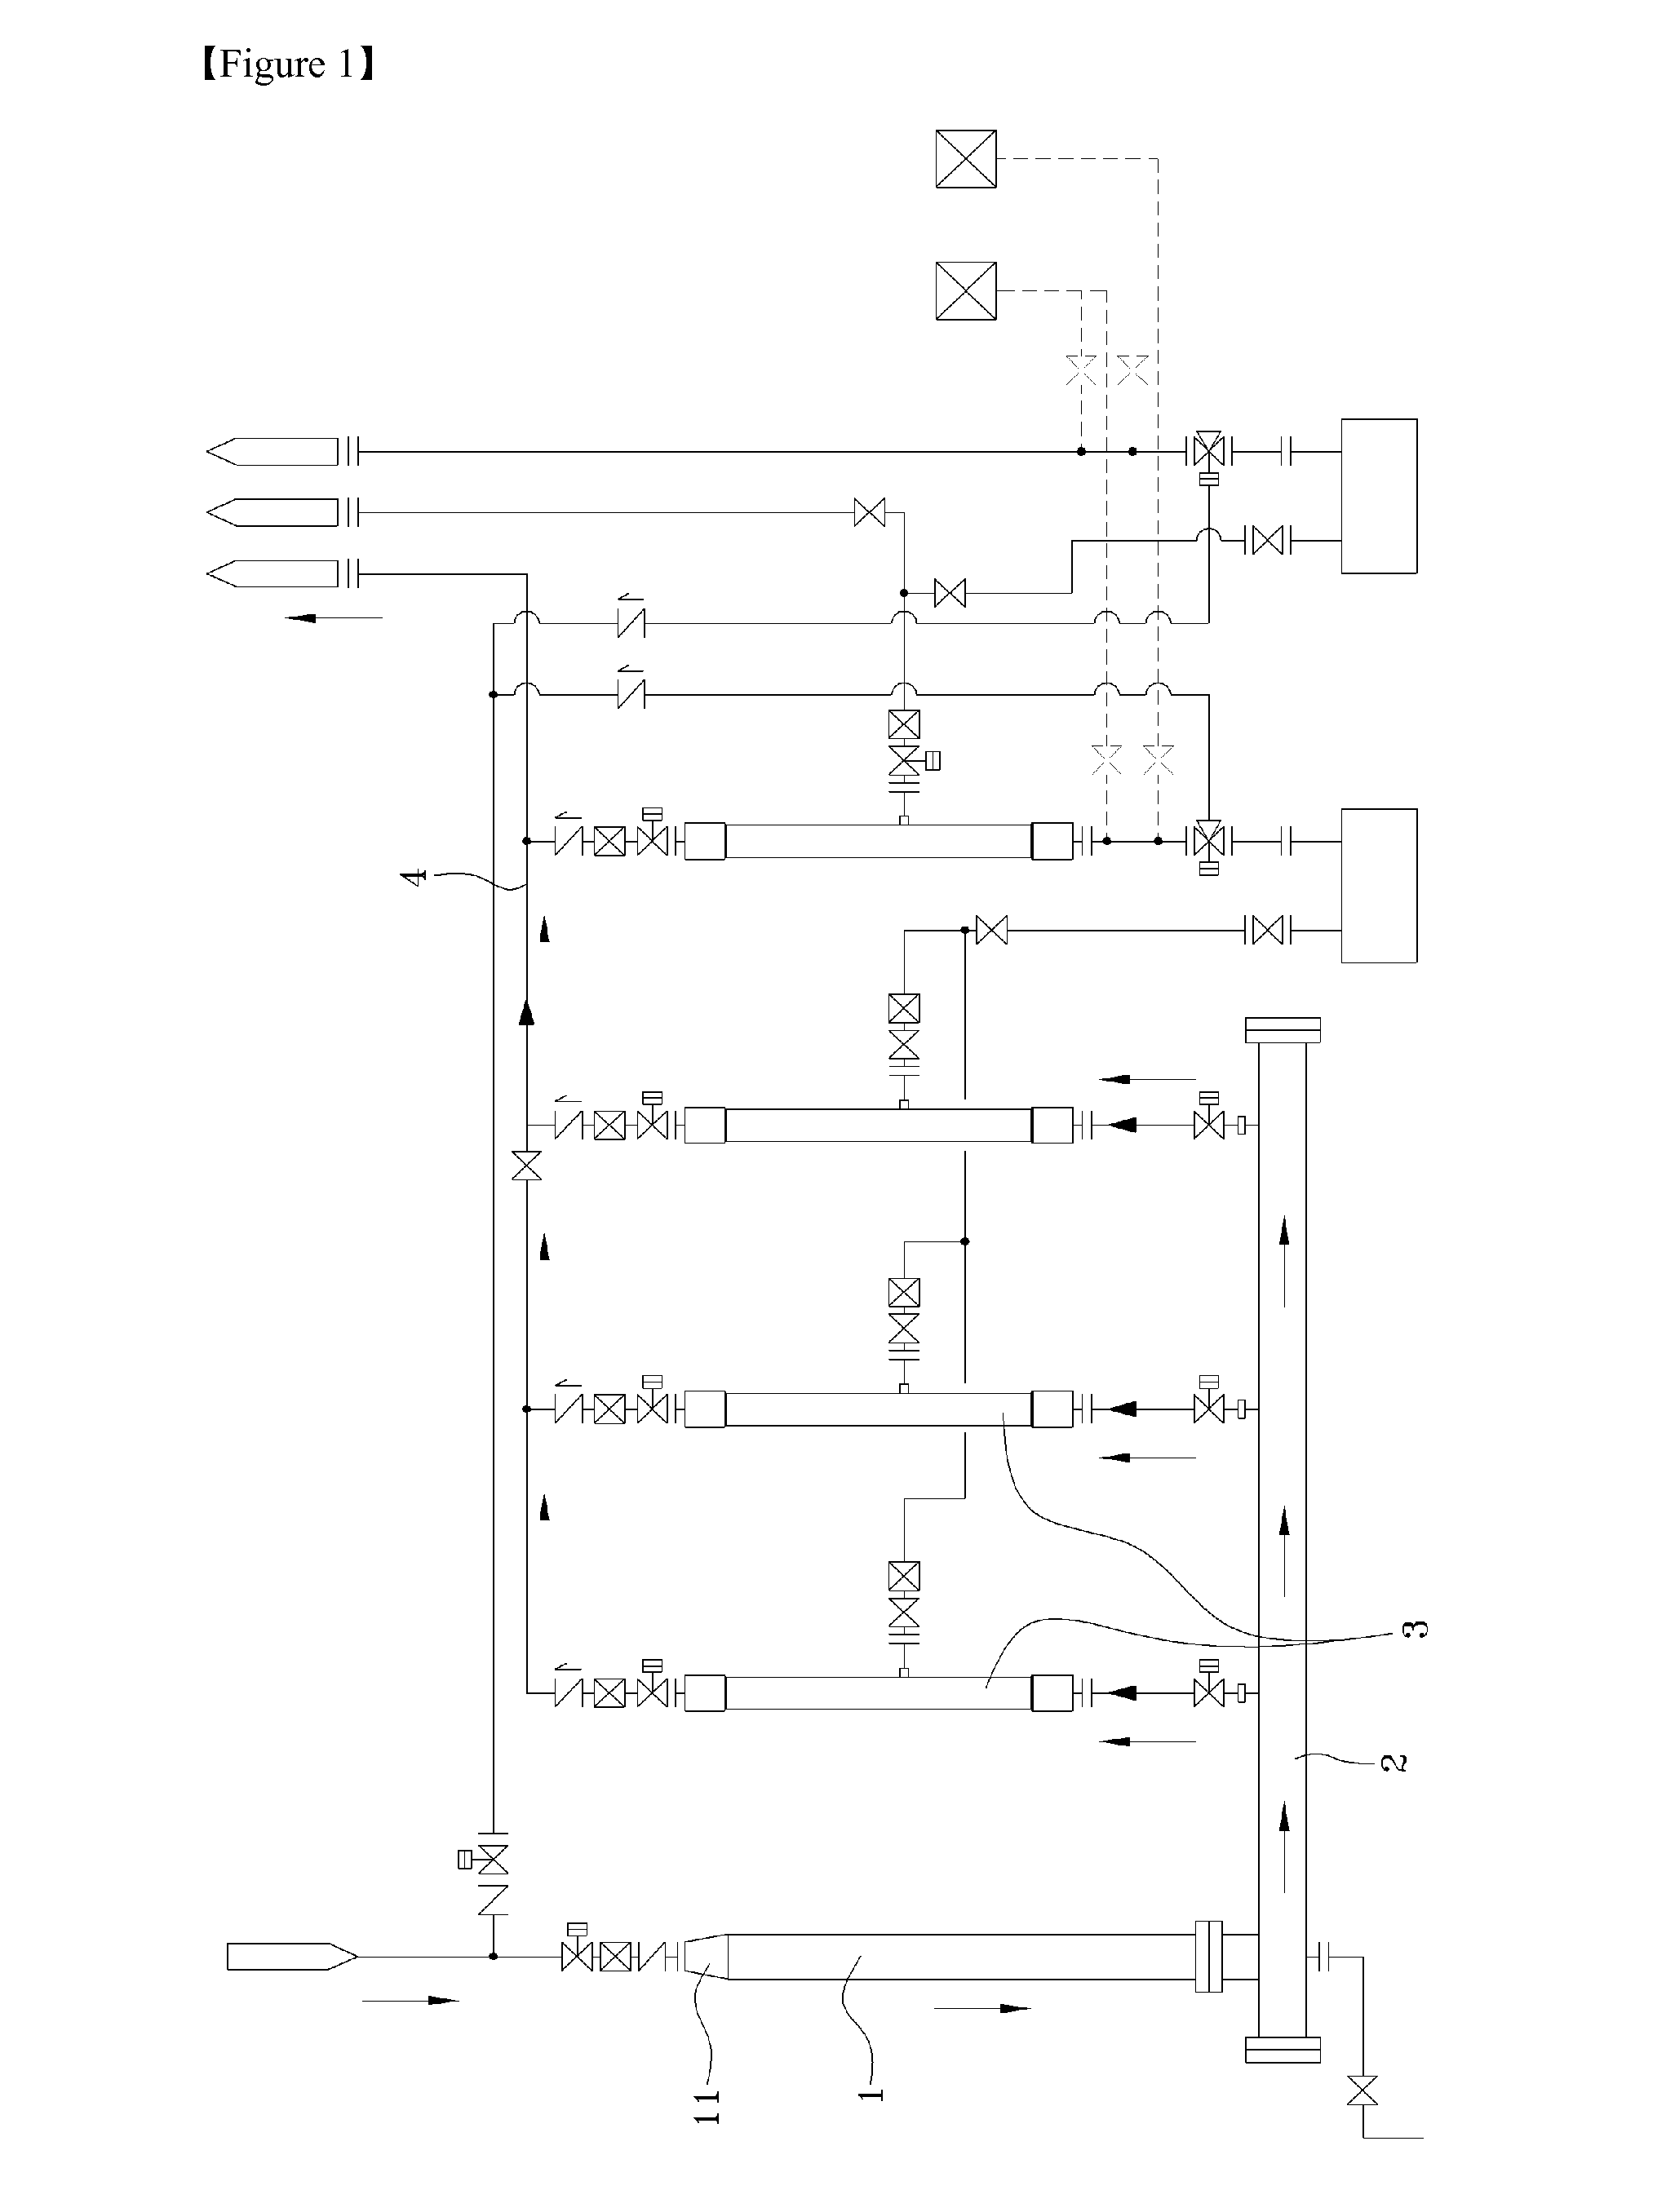 Separation and recycling system of perfluorinated compounds